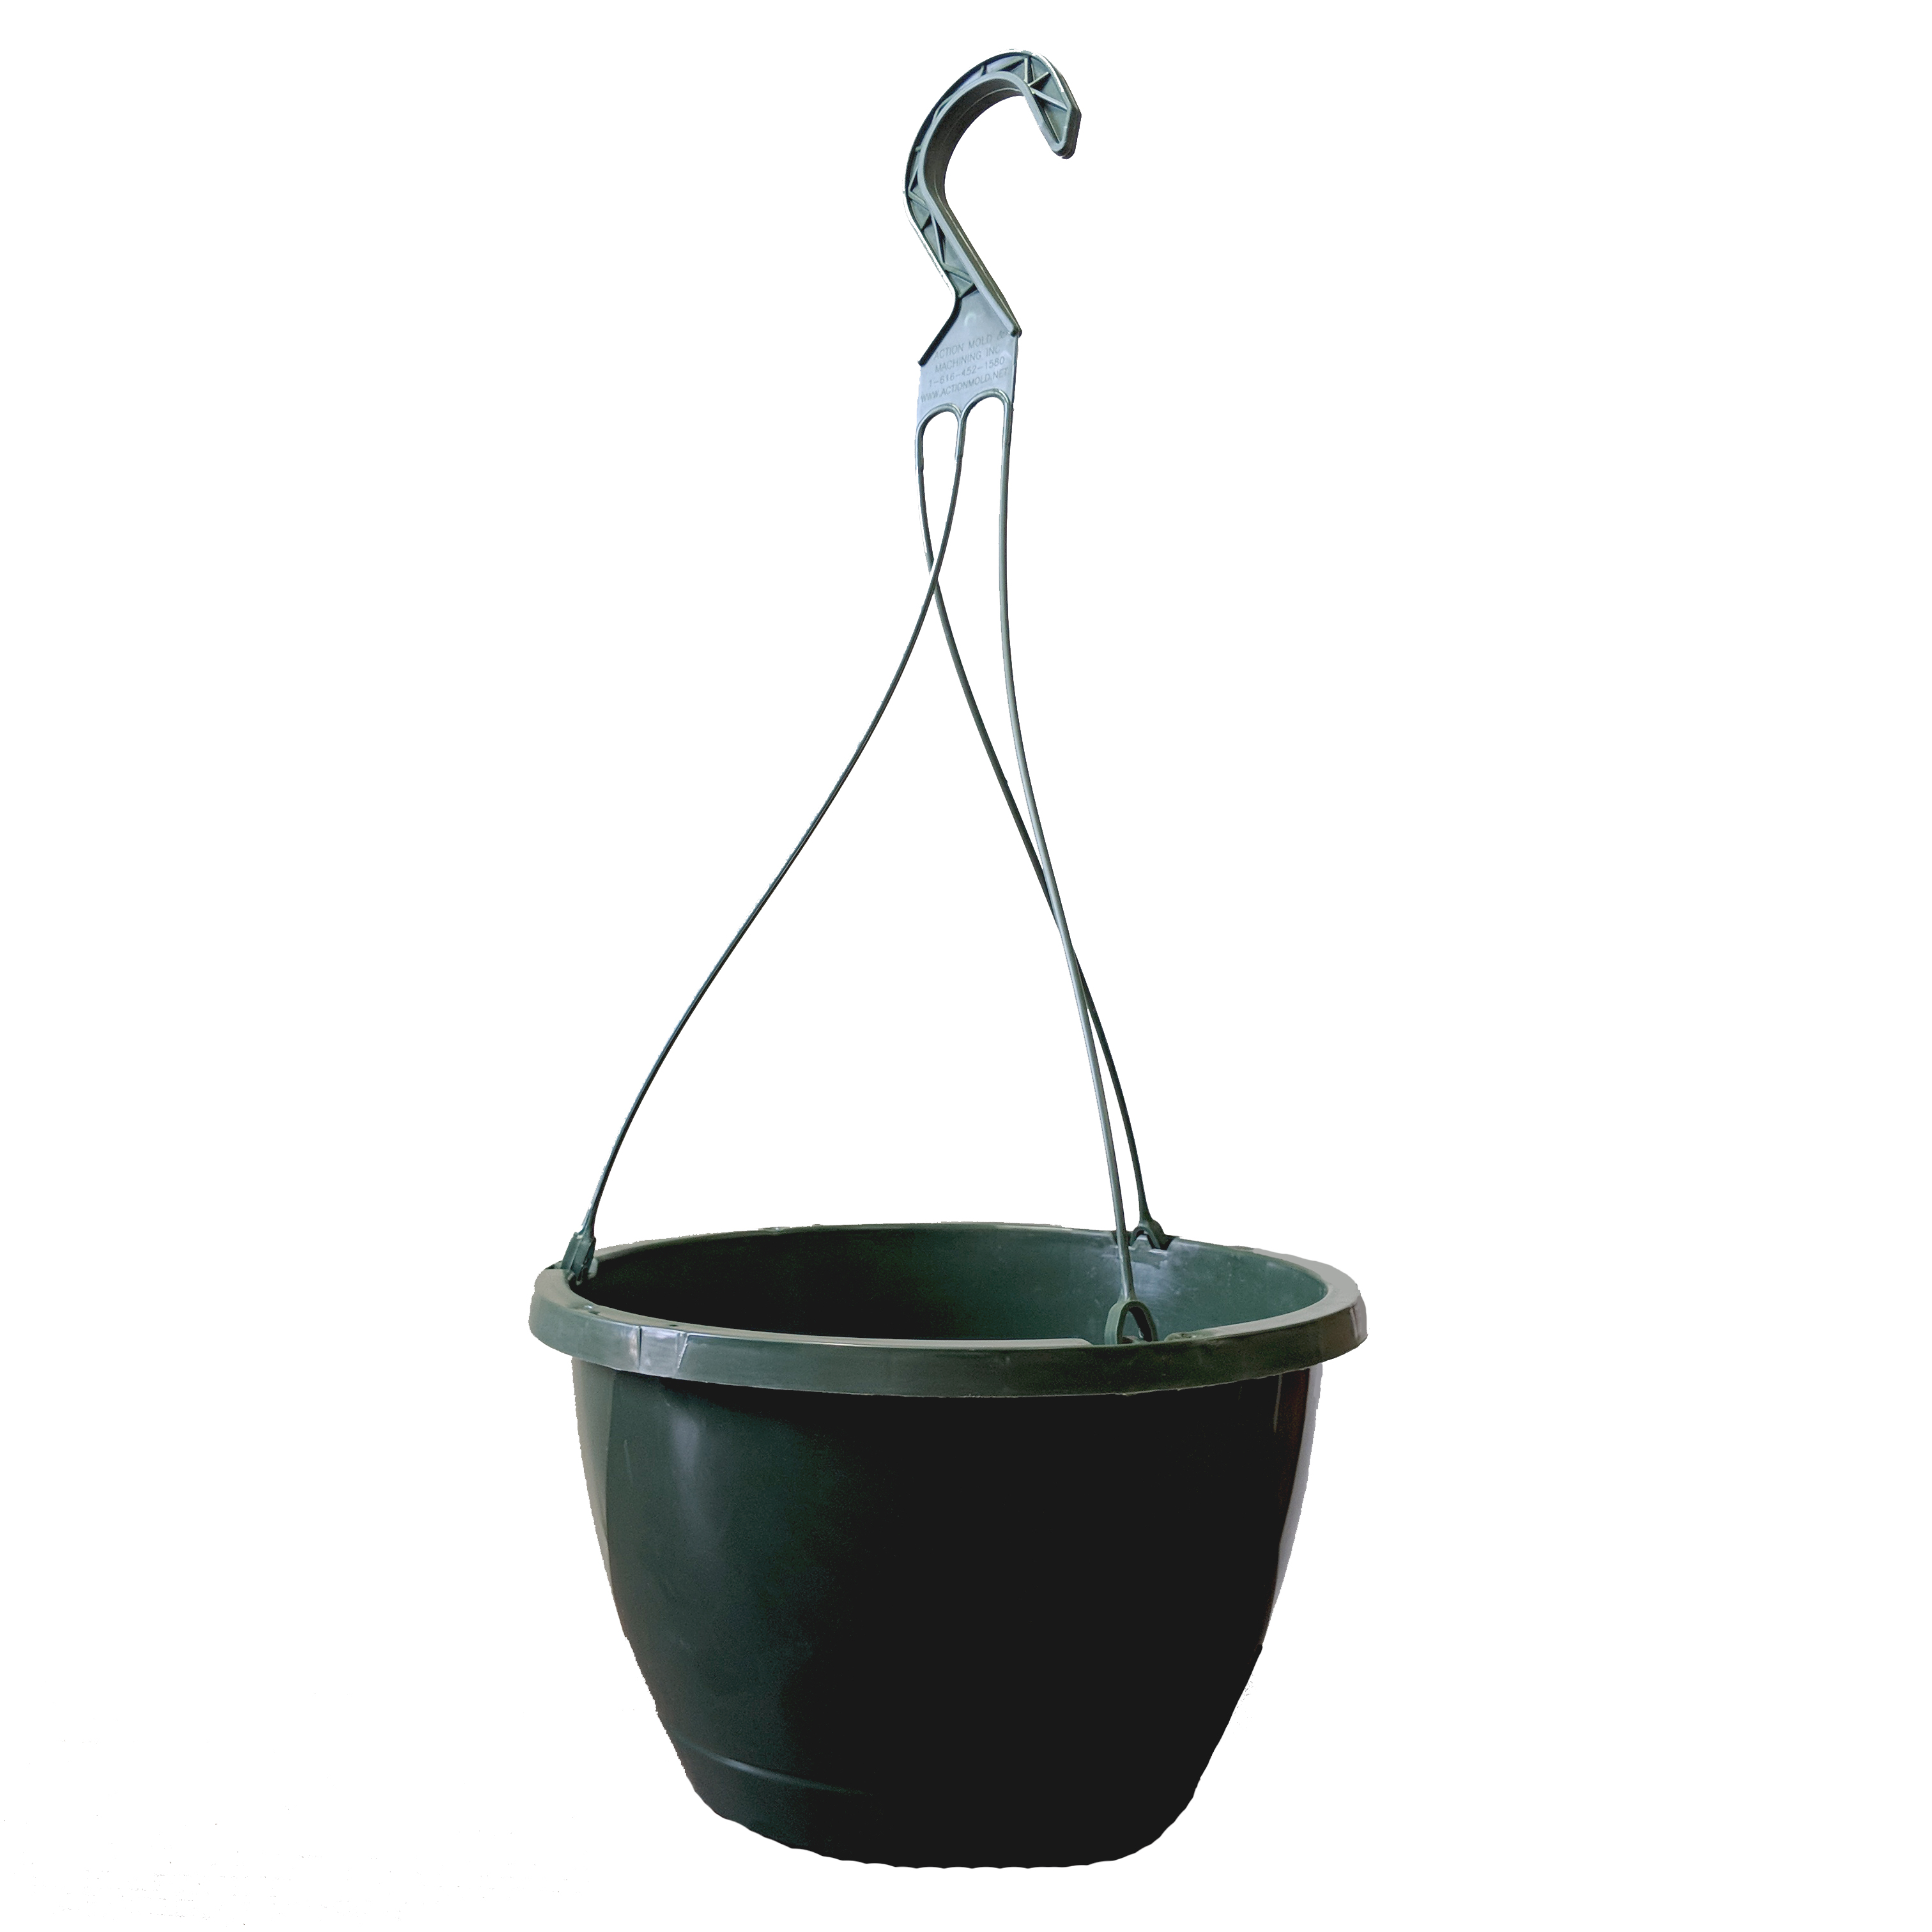 10 Inch Traditional Hanging Basket Green - 1575 per pallet